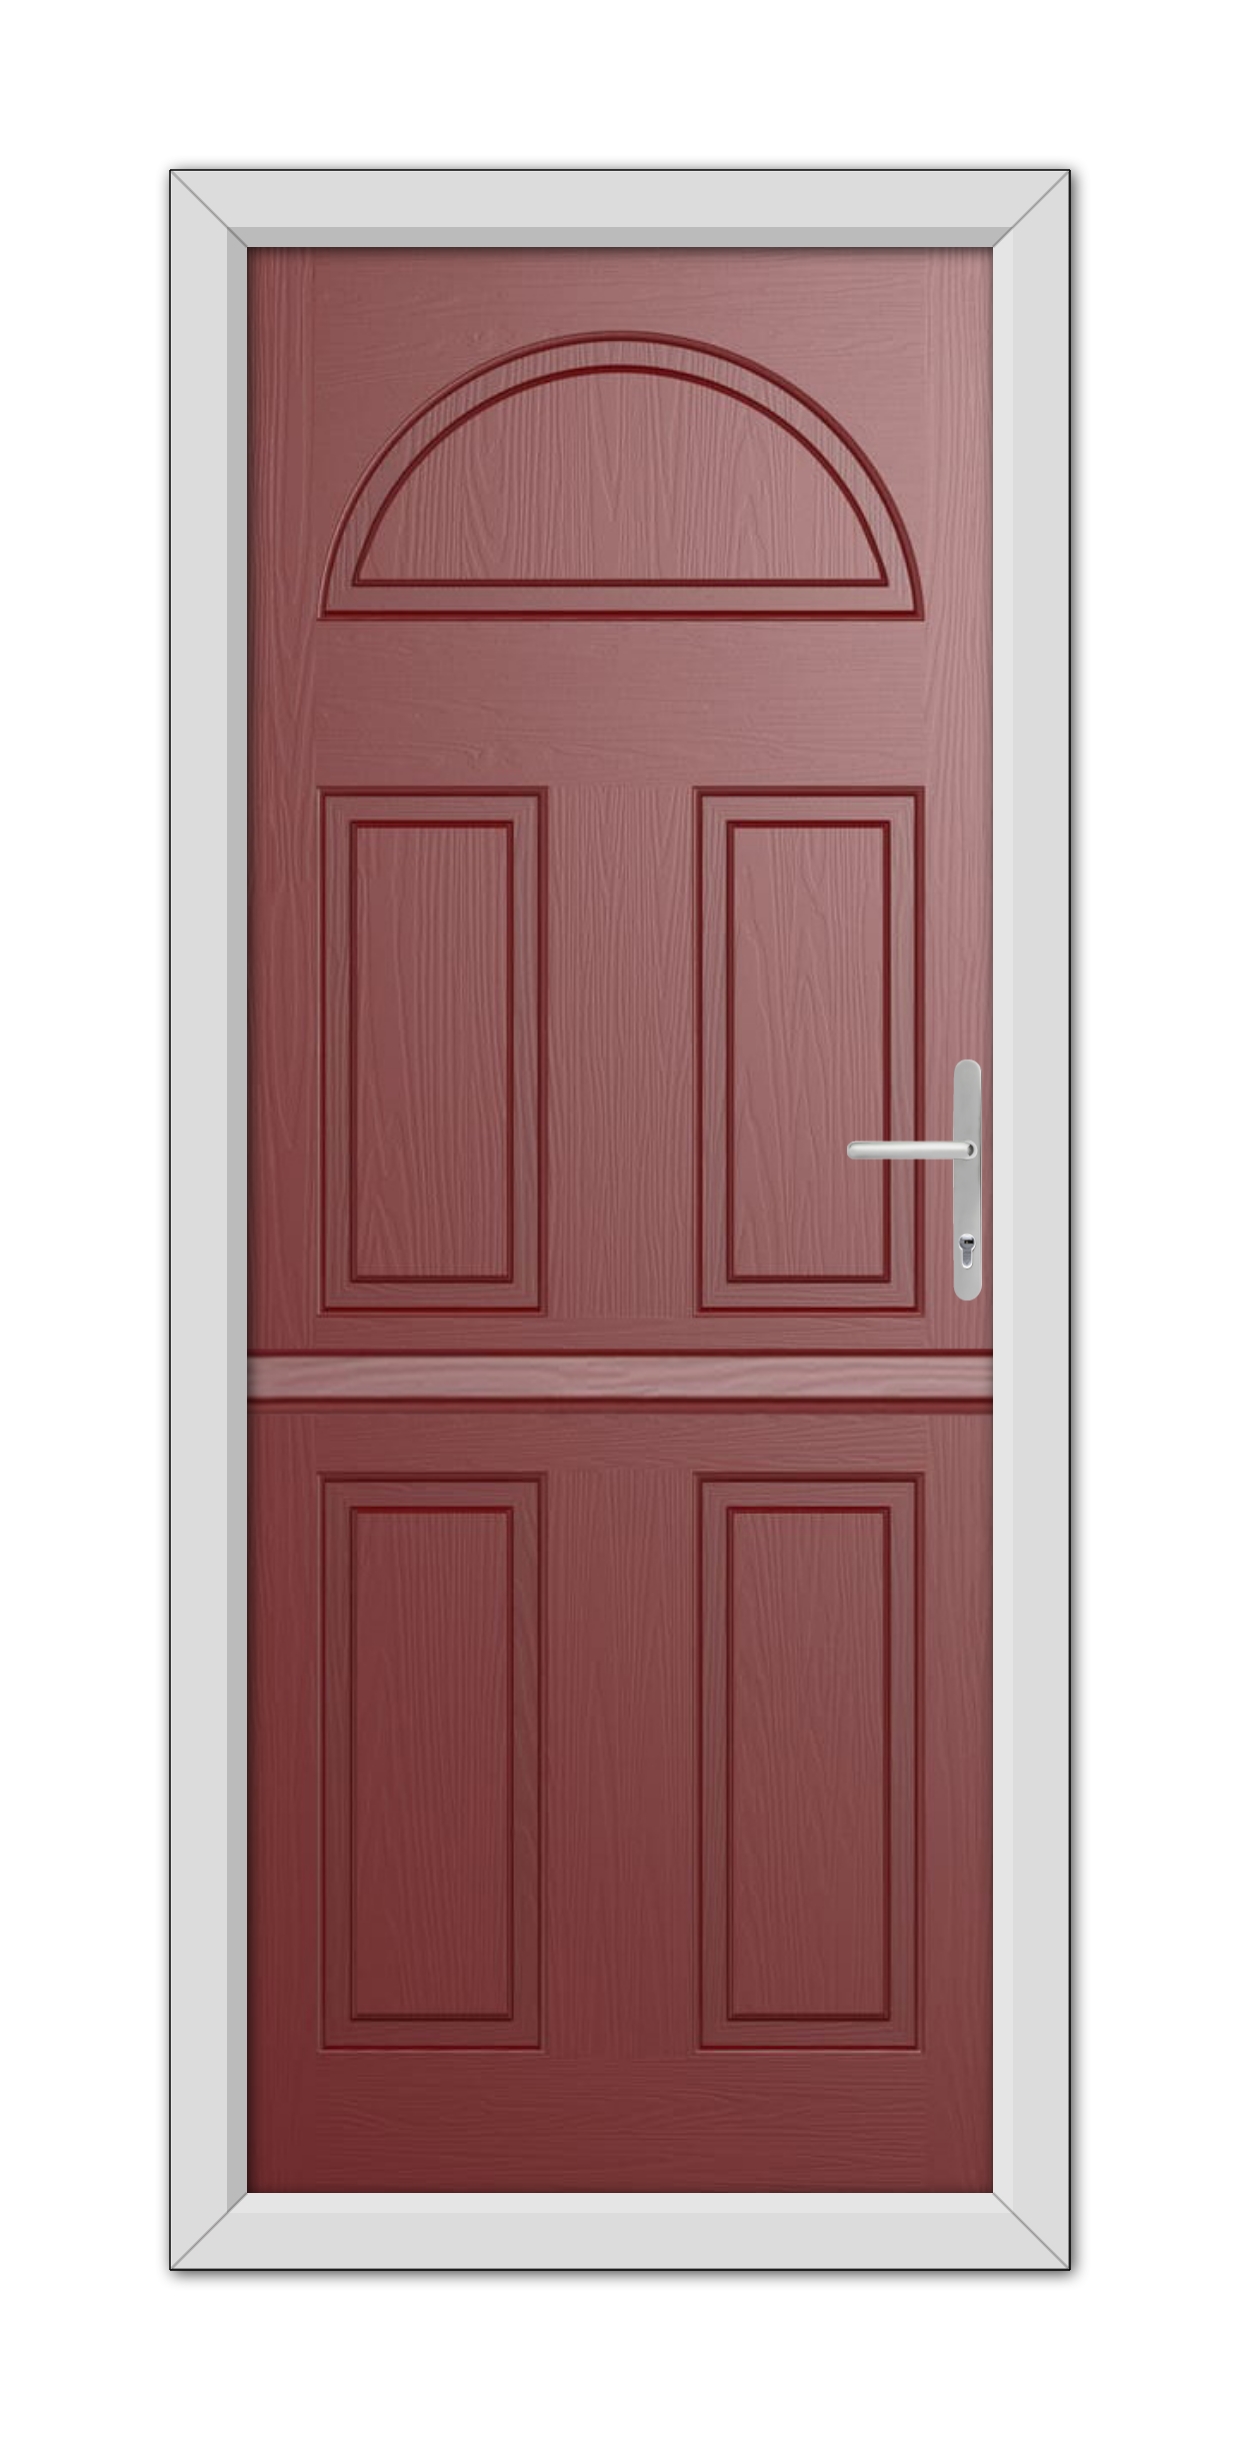 A Red Winslow Solid Stable Composite Door 48mm Timber Core with a semi-circular window at the top, framed in white, featuring a metal handle on the right side.